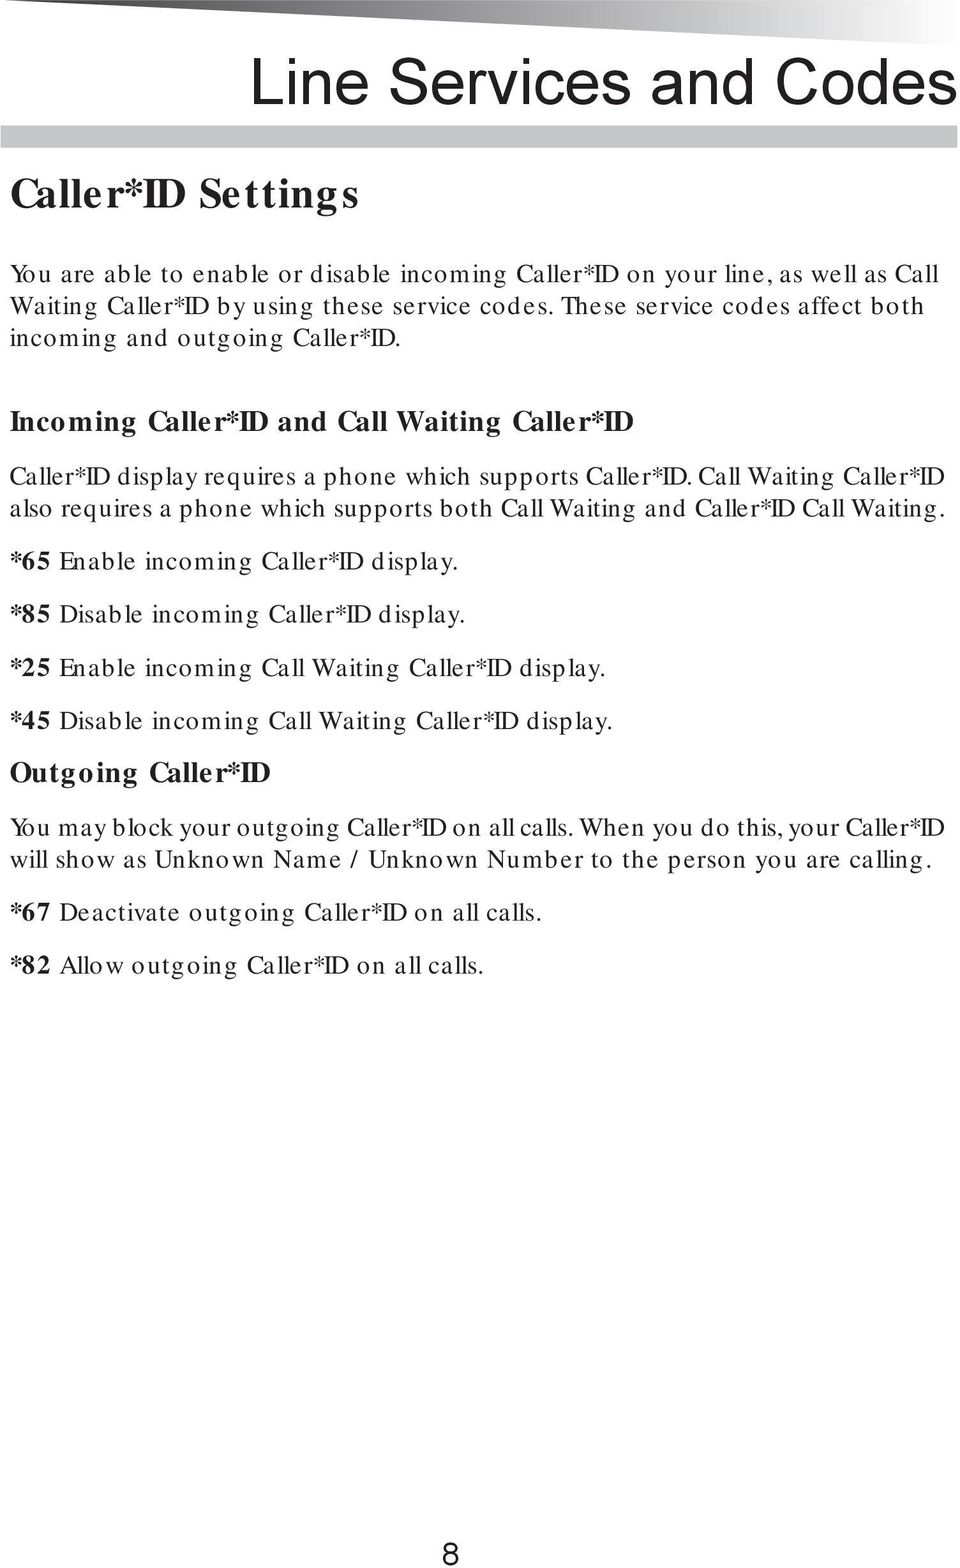 Call Waiting Caller*ID also requires a phone which supports both Call Waiting and Caller*ID Call Waiting. *65 Enable incoming Caller*ID display. *85 Disable incoming Caller*ID display.